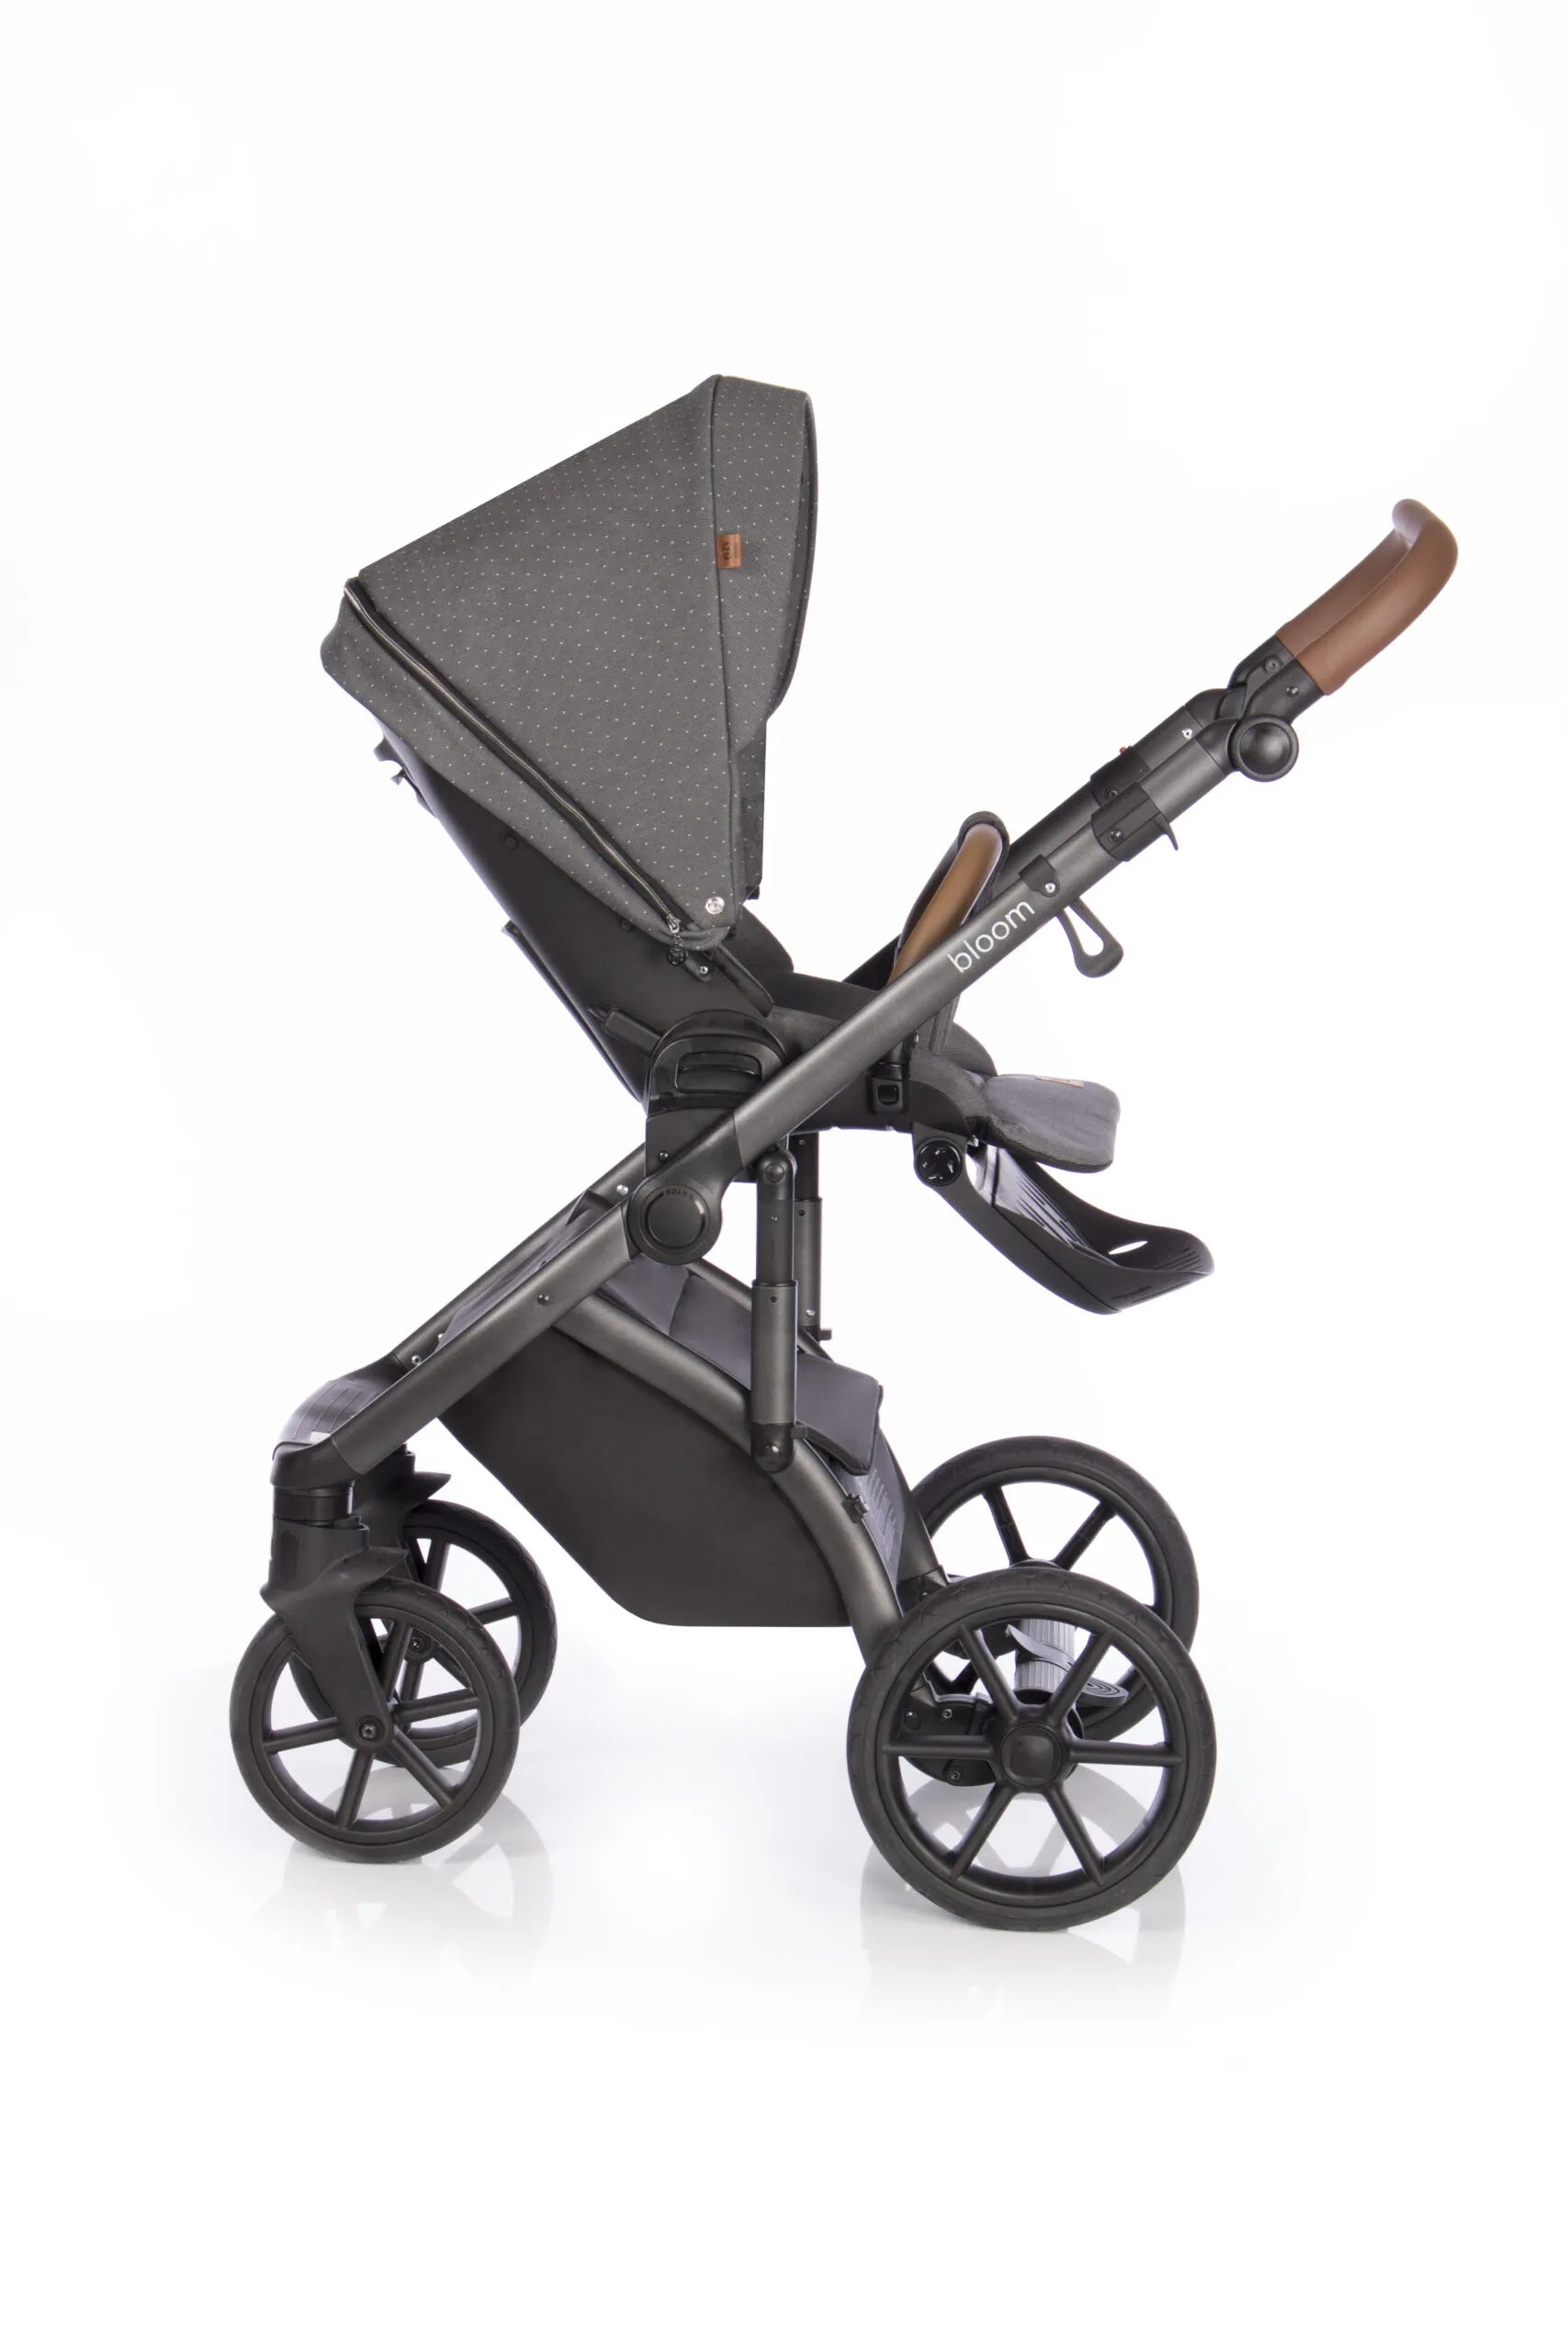 Roan BLOOM baby stroller 2 in 1, carry cot and stroller, color Black Dots